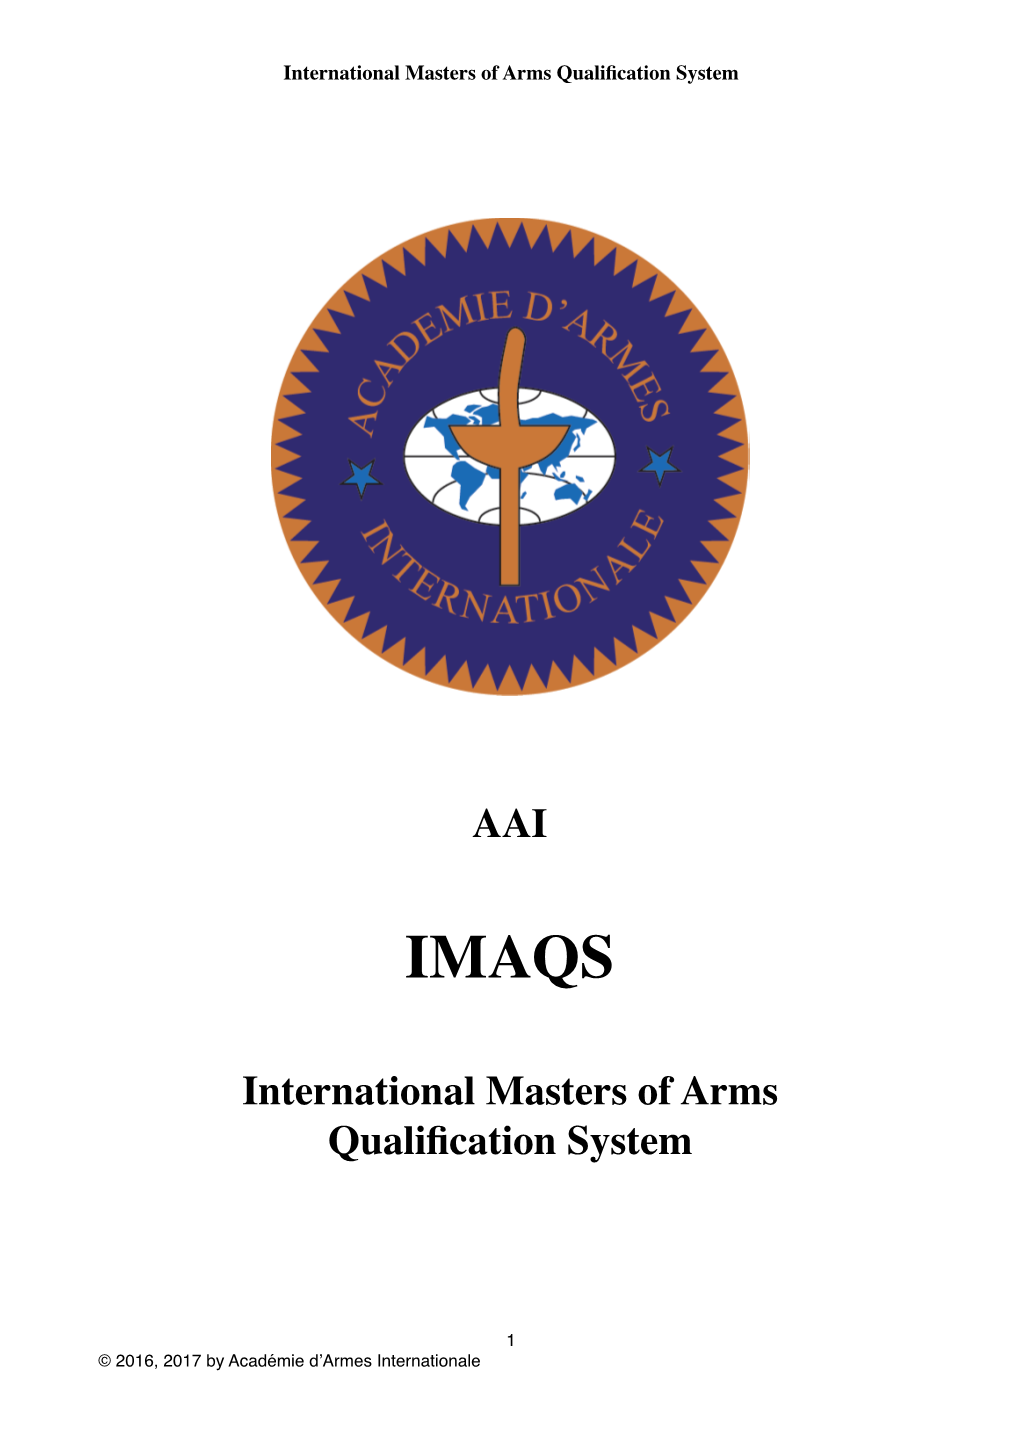 AAI International Masters of Arms Qualification System